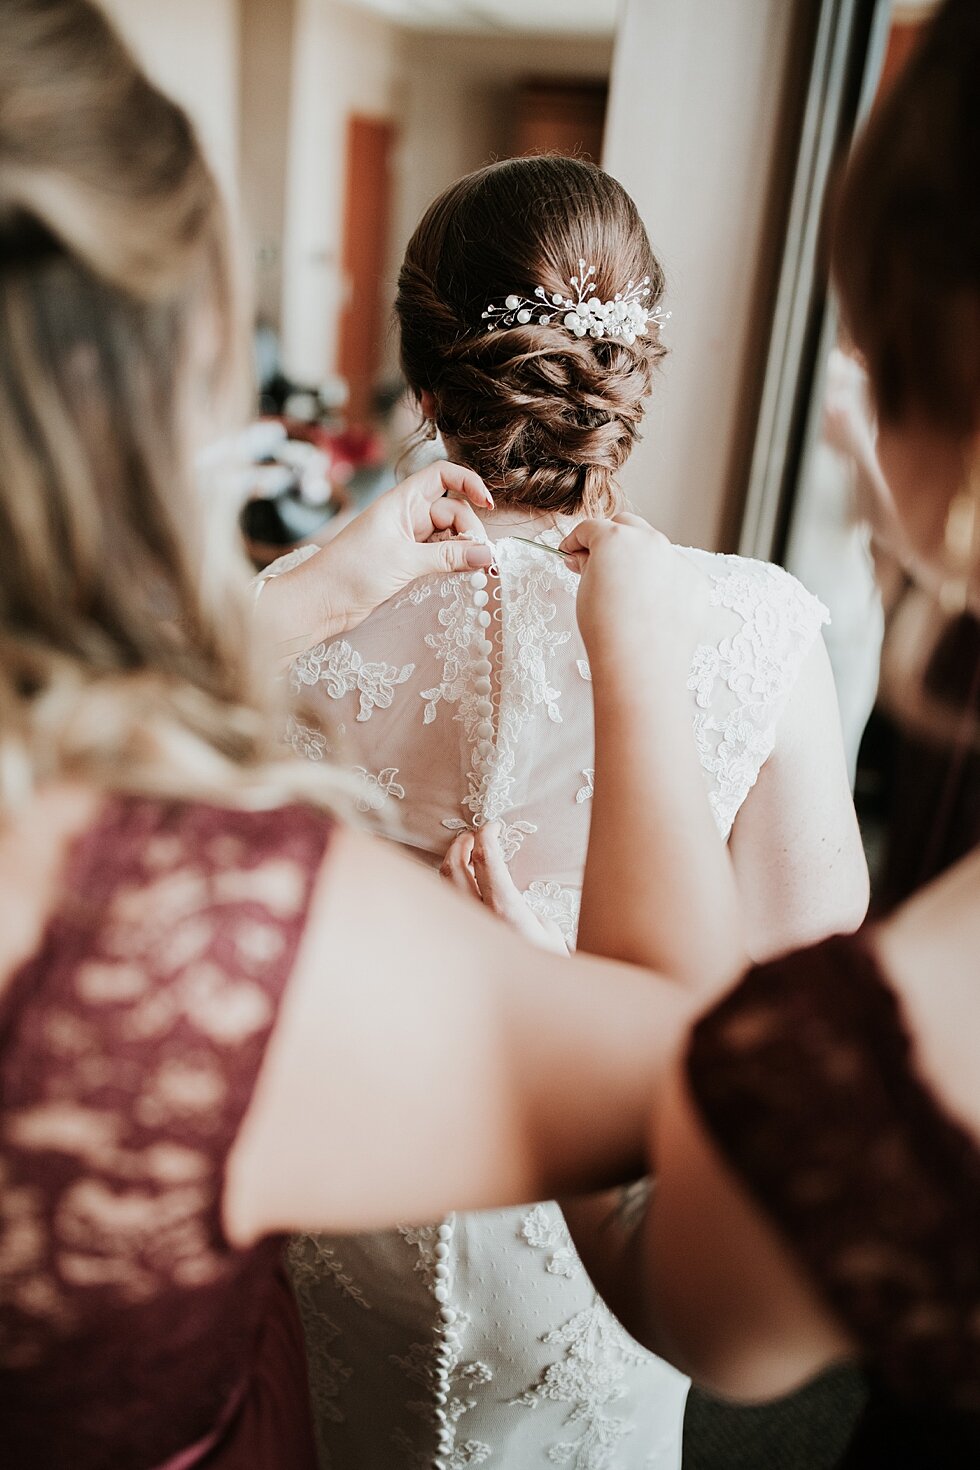  Bride gets ready with bridesmaids at Frazier History Museum   #weddingphotographer #married #ceremonyandreception #indianaphotographer #louisvillephotographer #weddingphotos #husbandandwife #gorgeousweddingown #thewholeweddingpackage #frazierhistory